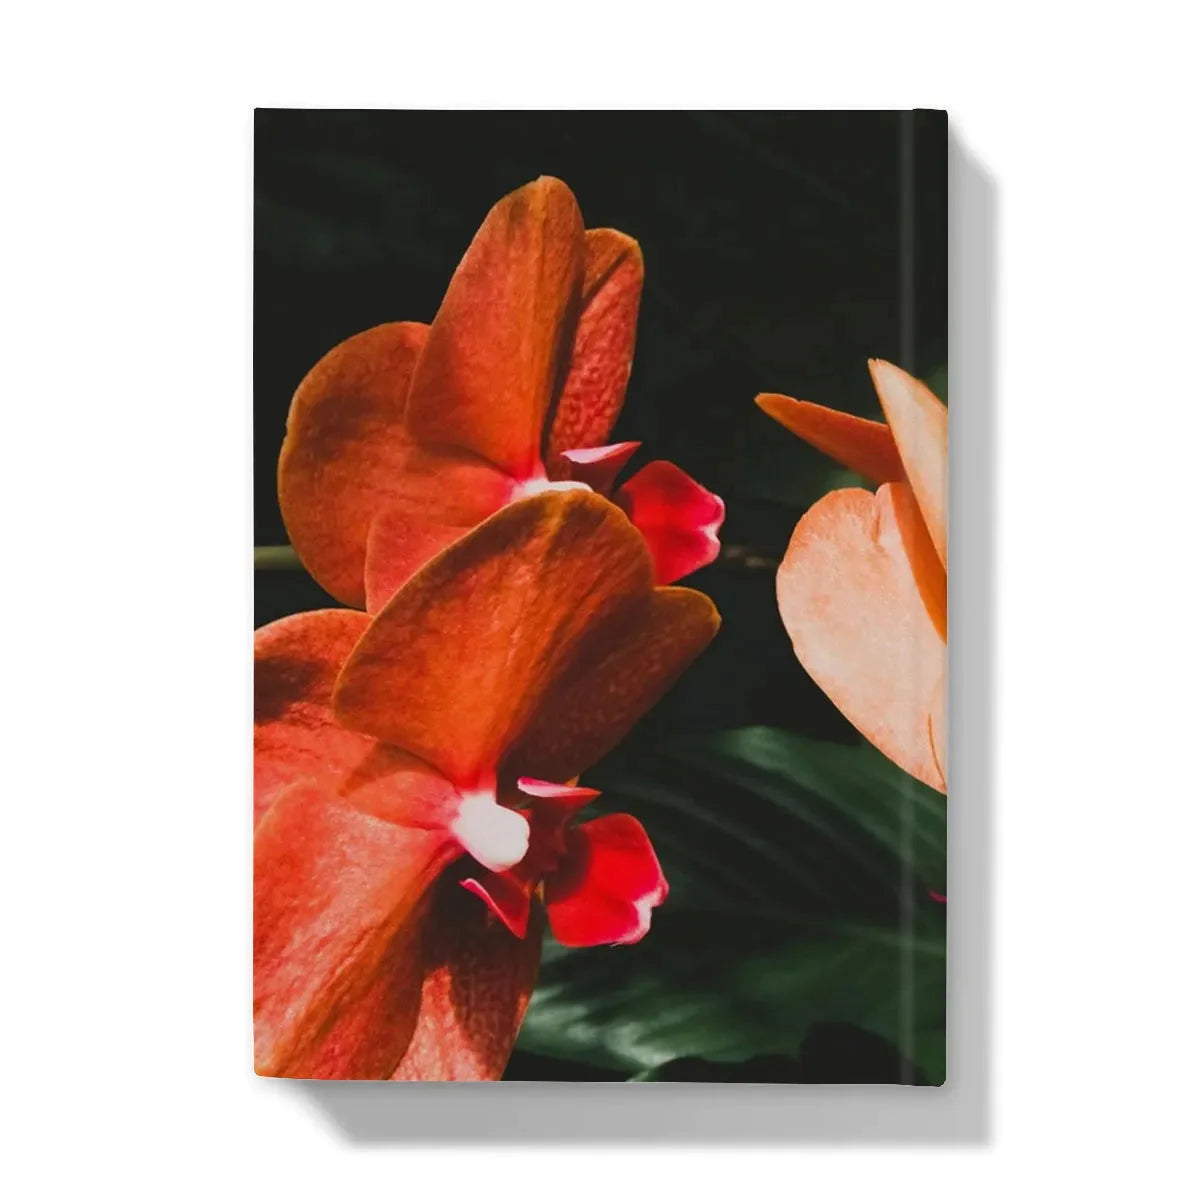 Floral Coral Hardback Journal - Notebooks & Notepads - Aesthetic Art